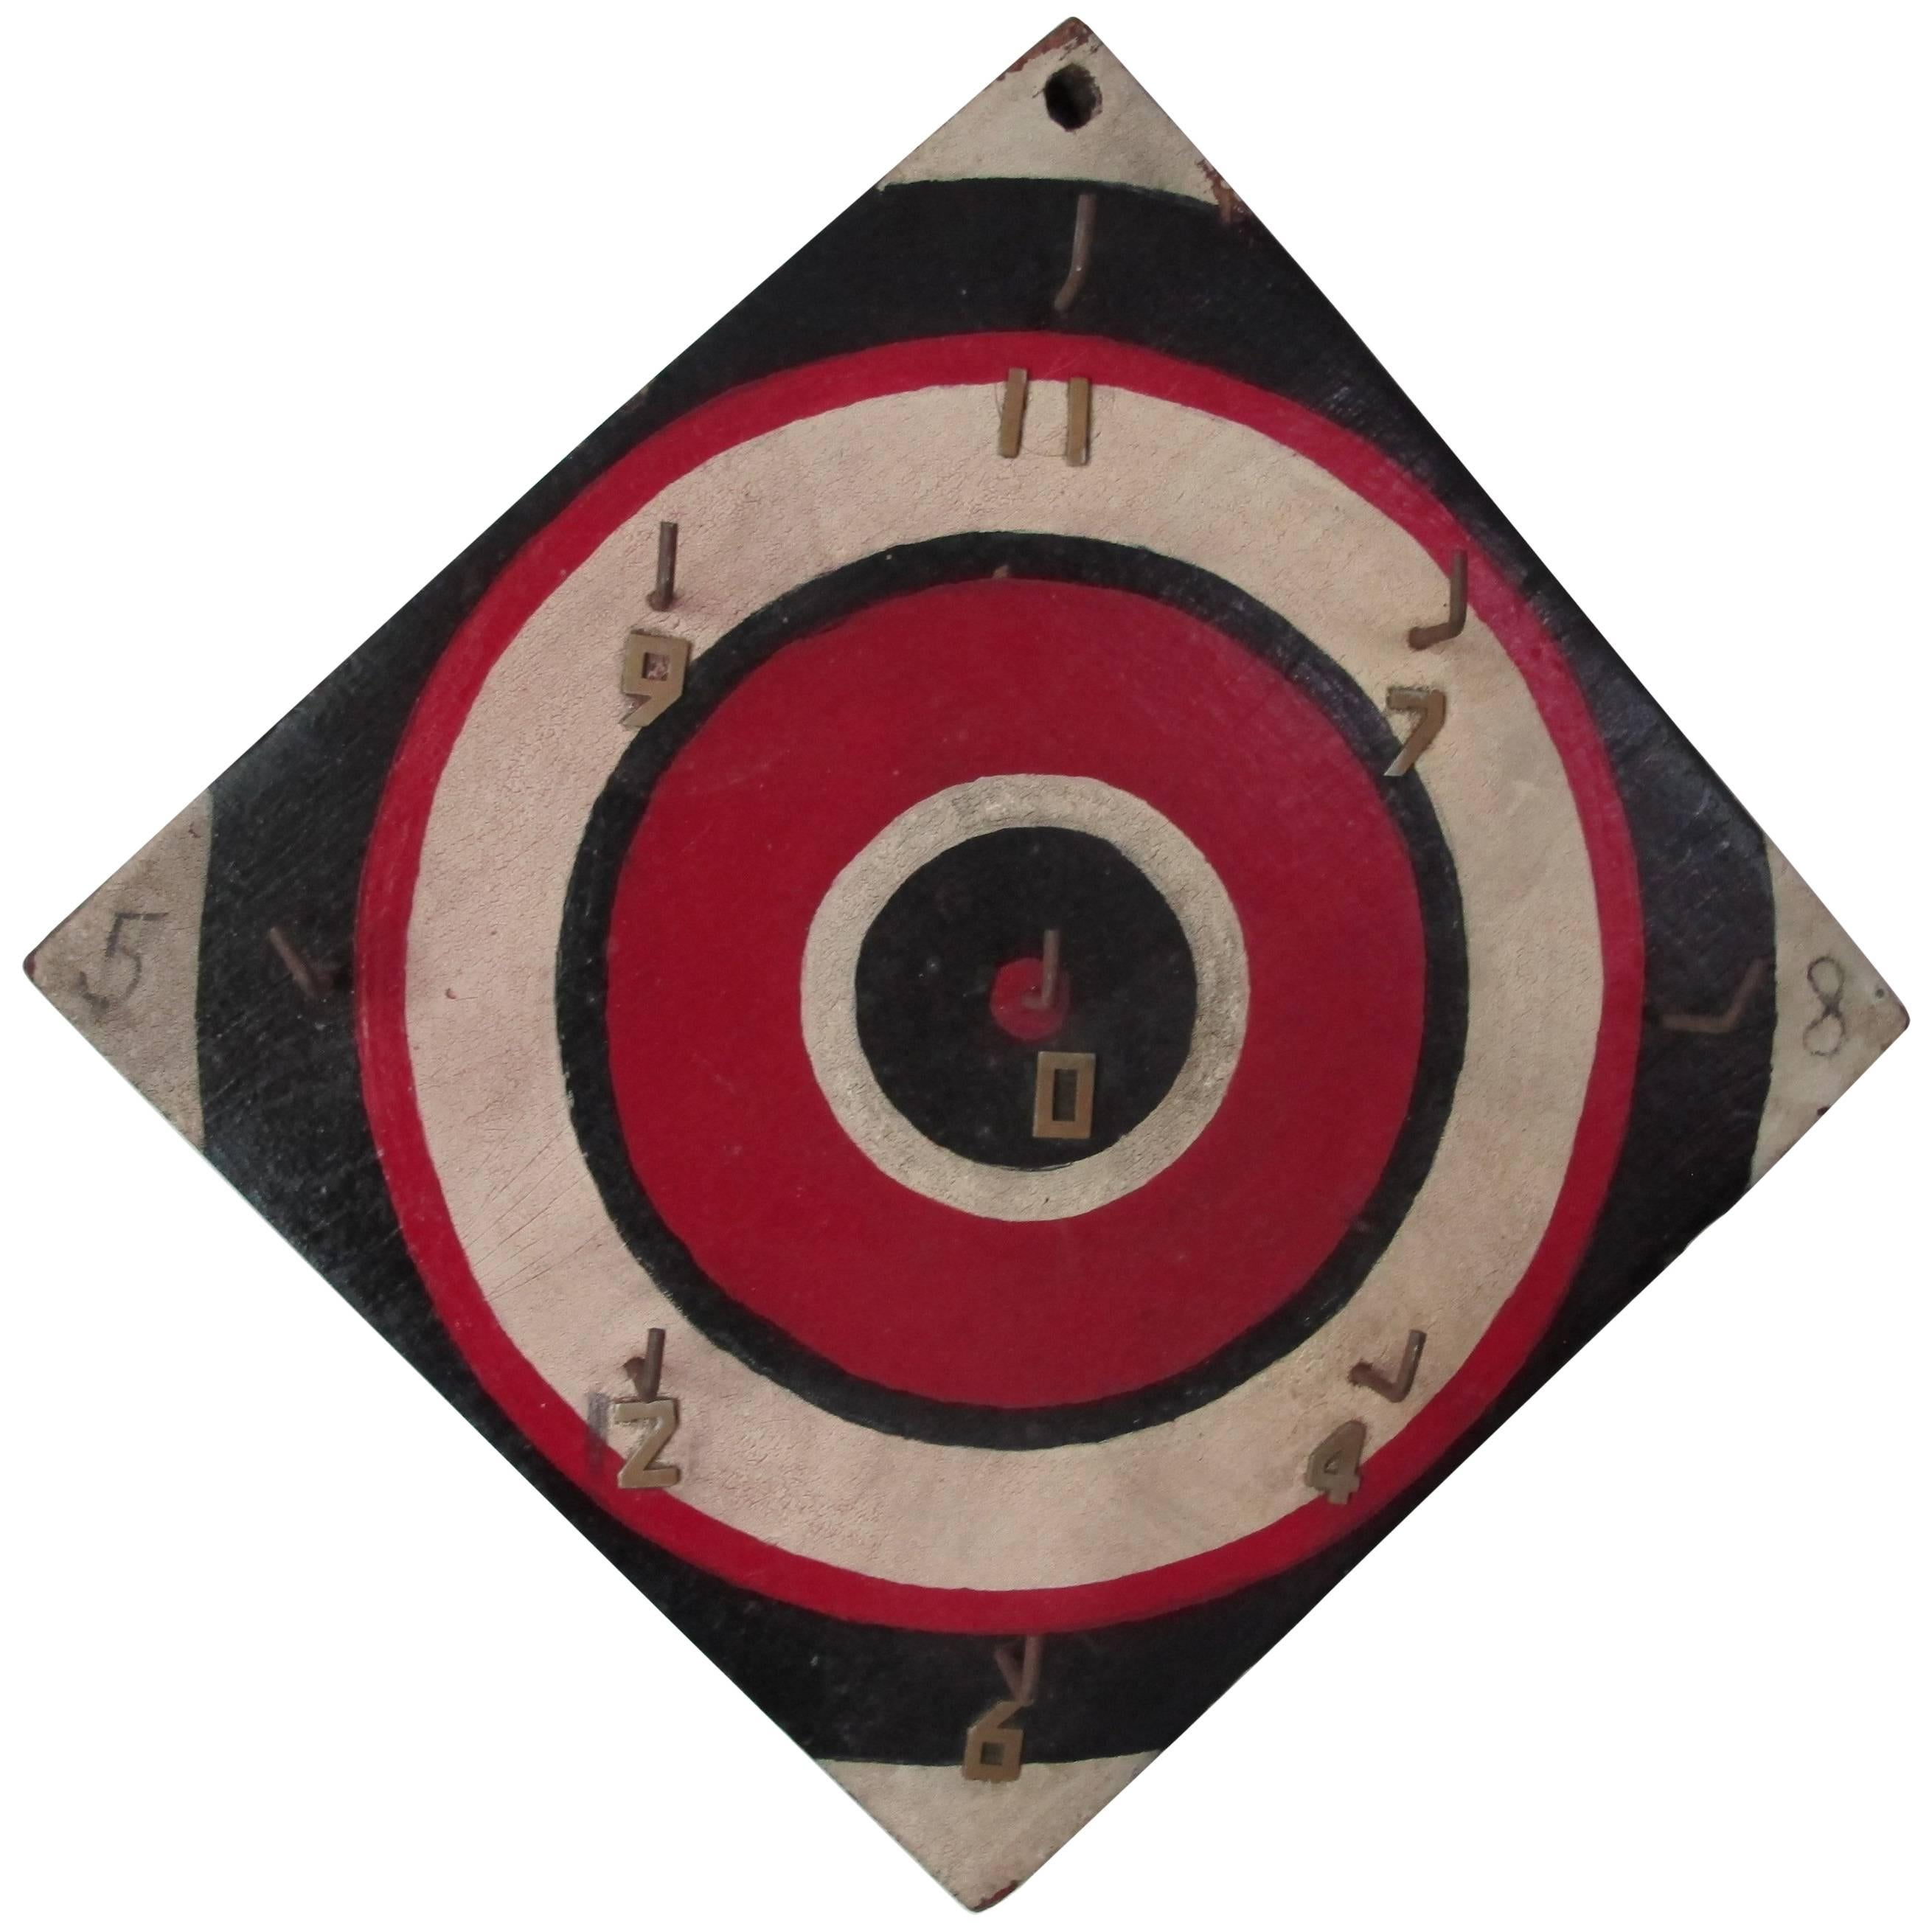 Graphic Bulls Eye Target Ring Toss Game Board For Sale